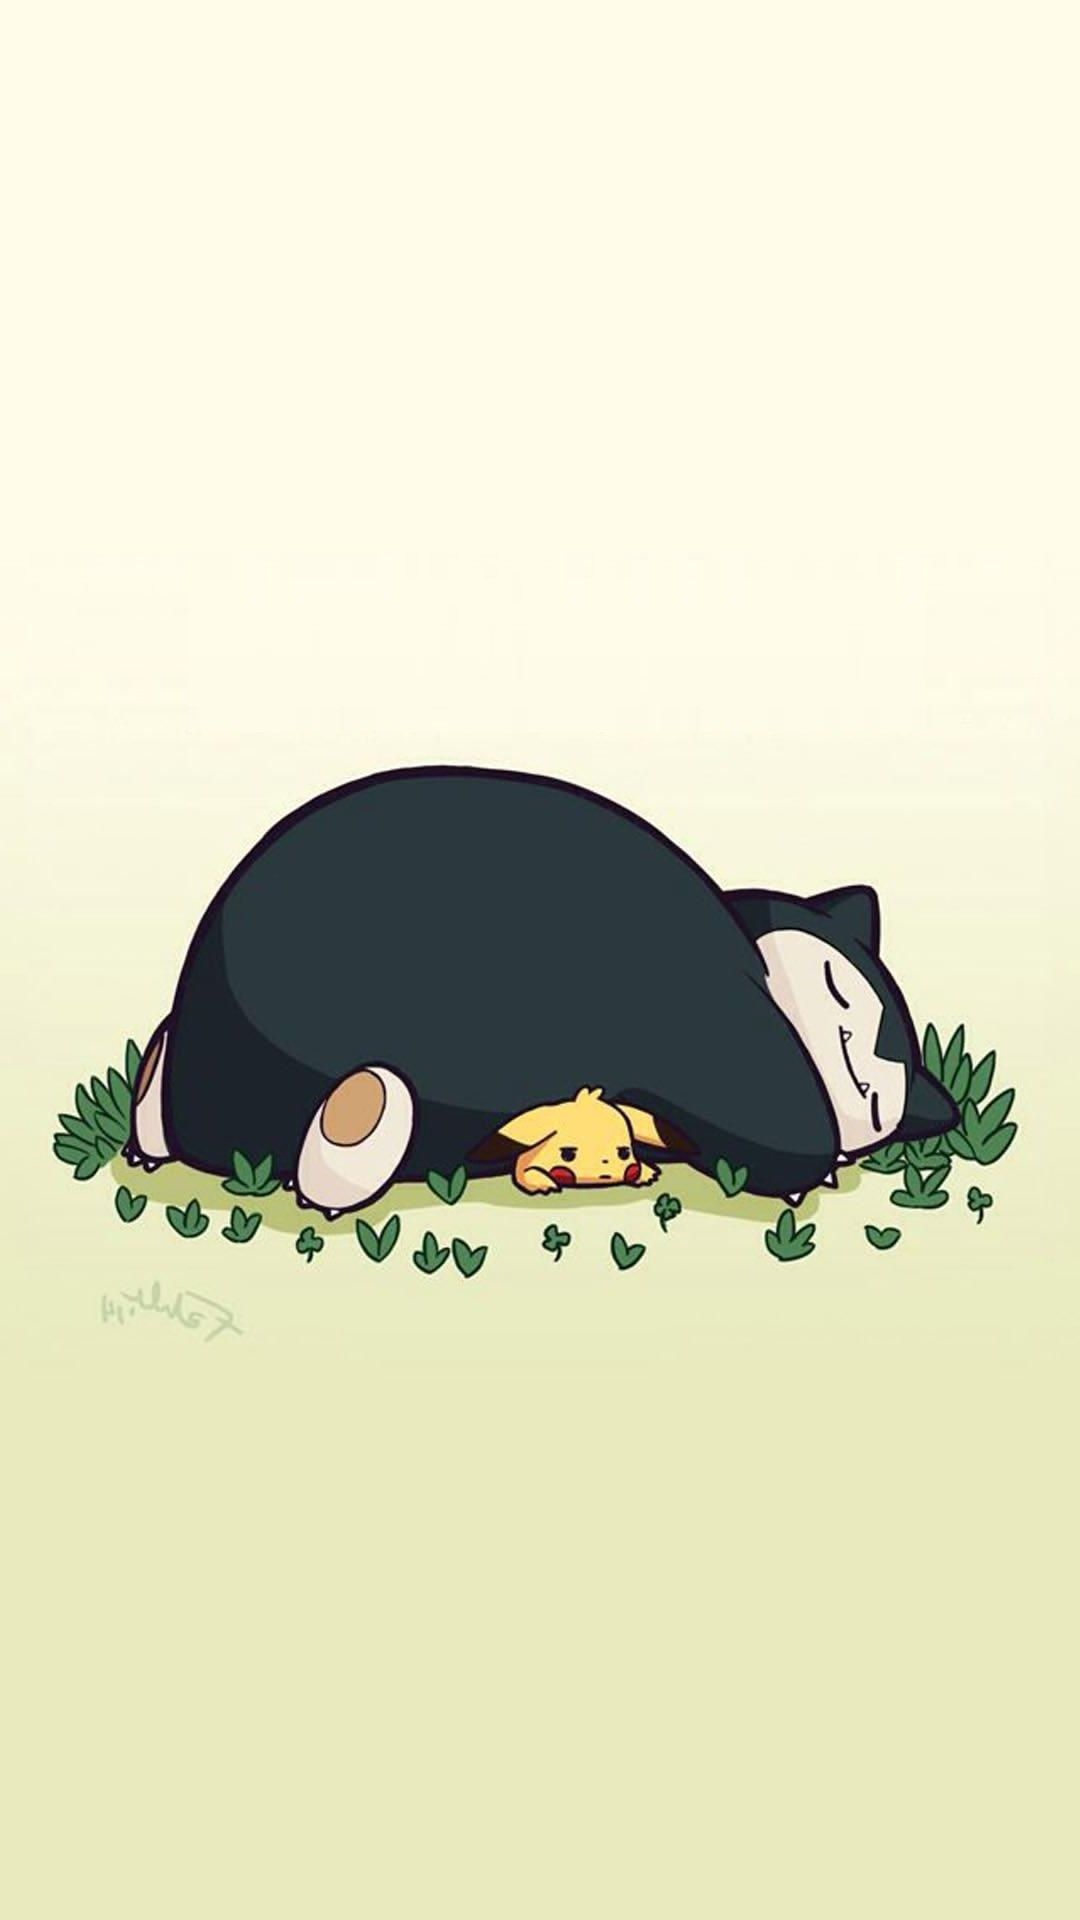 1080x1920 Snorlax Wallpaper for mobile phone, tablet, desktop computer and other devices HD and 4K wallpapers. | Chibi wallpaper, Pokemon snorlax, Cute pokemon wallpaper